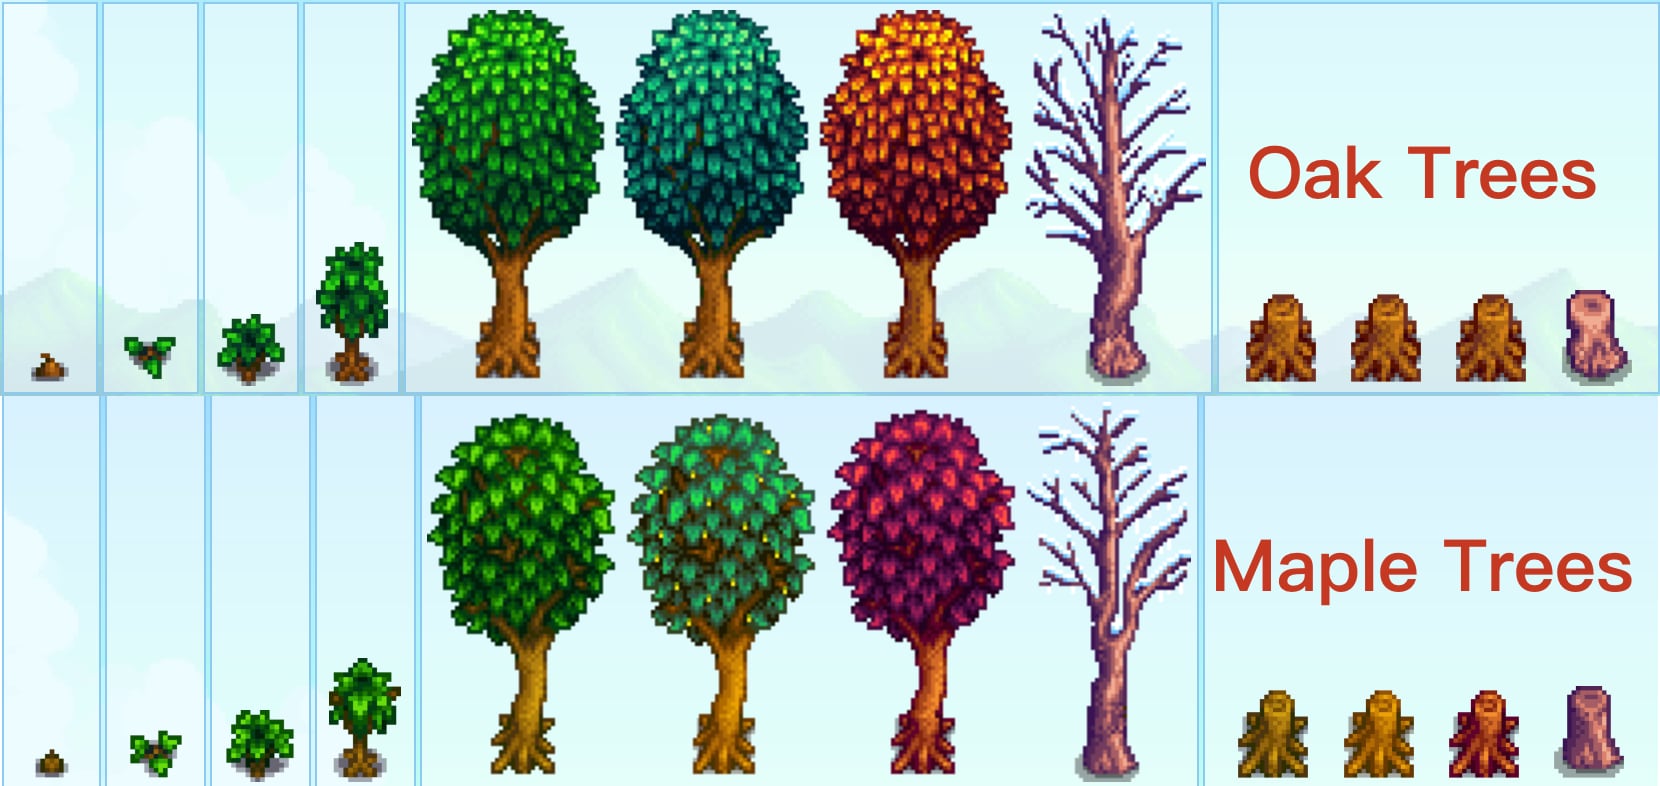 A side-by-side comparison of oak and maple trees in various seasons